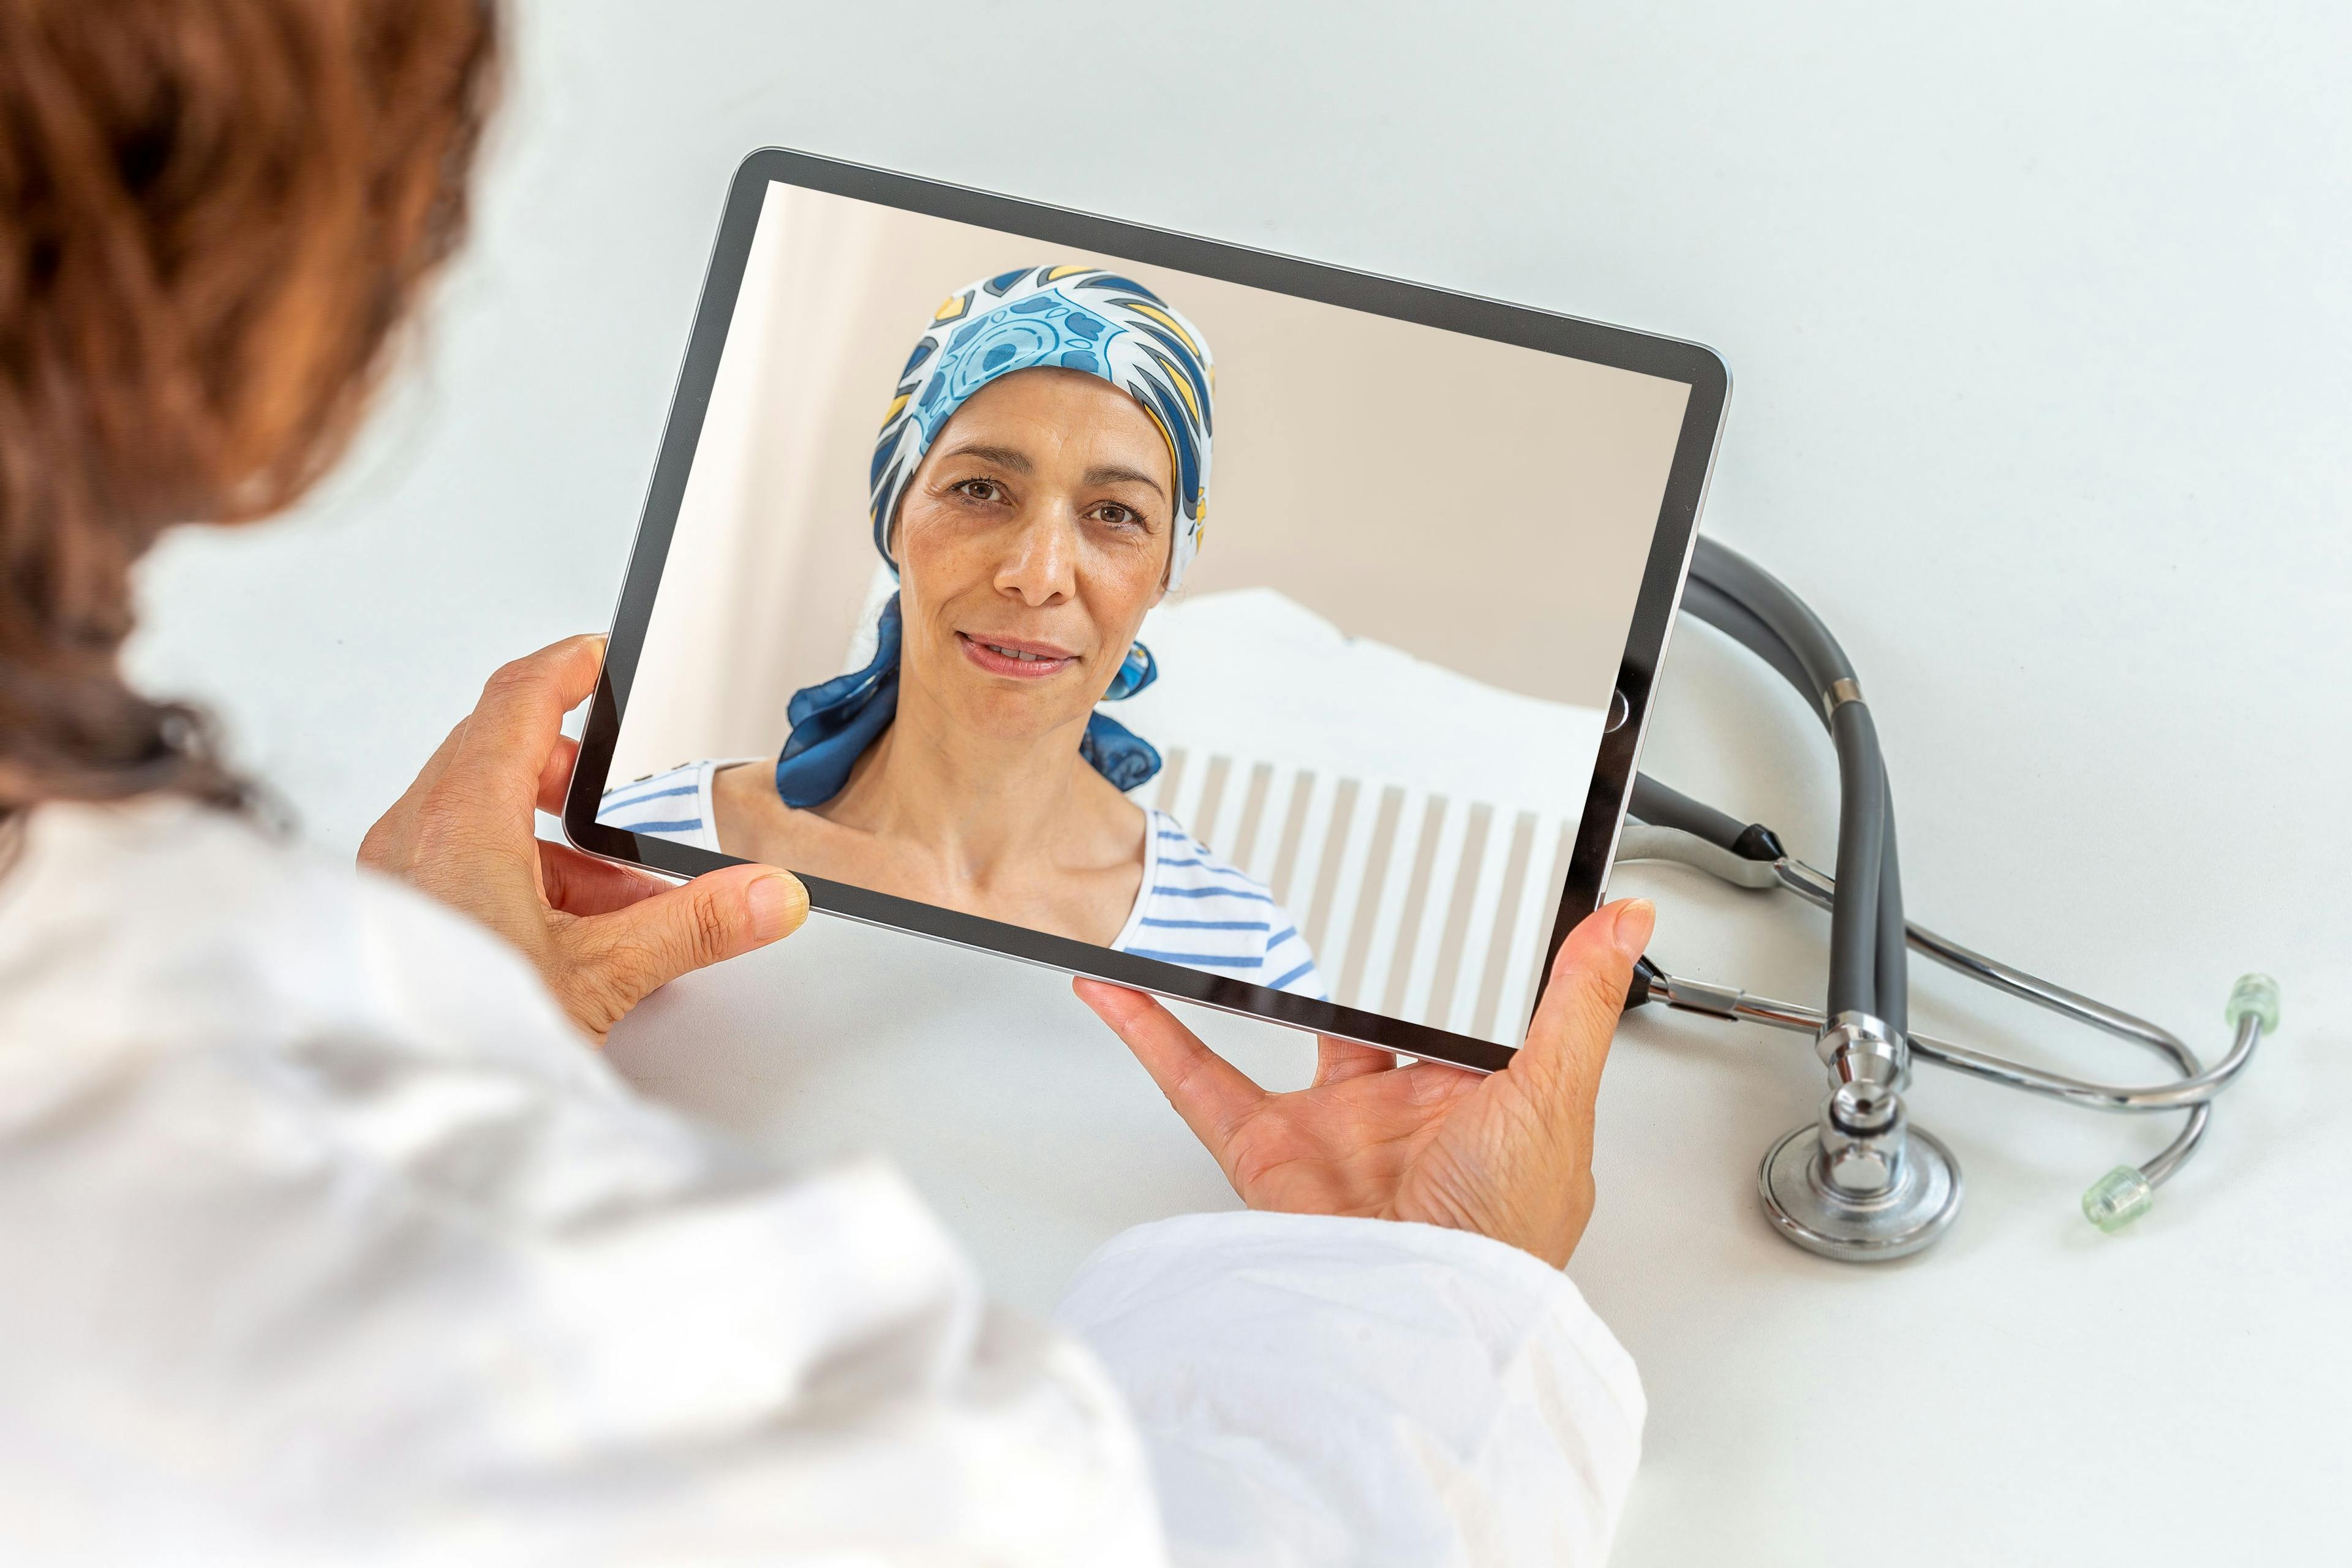 Study: Telemedicine Optimizes Glycemic Control of Patients With Type 1, Type 2 Diabetes